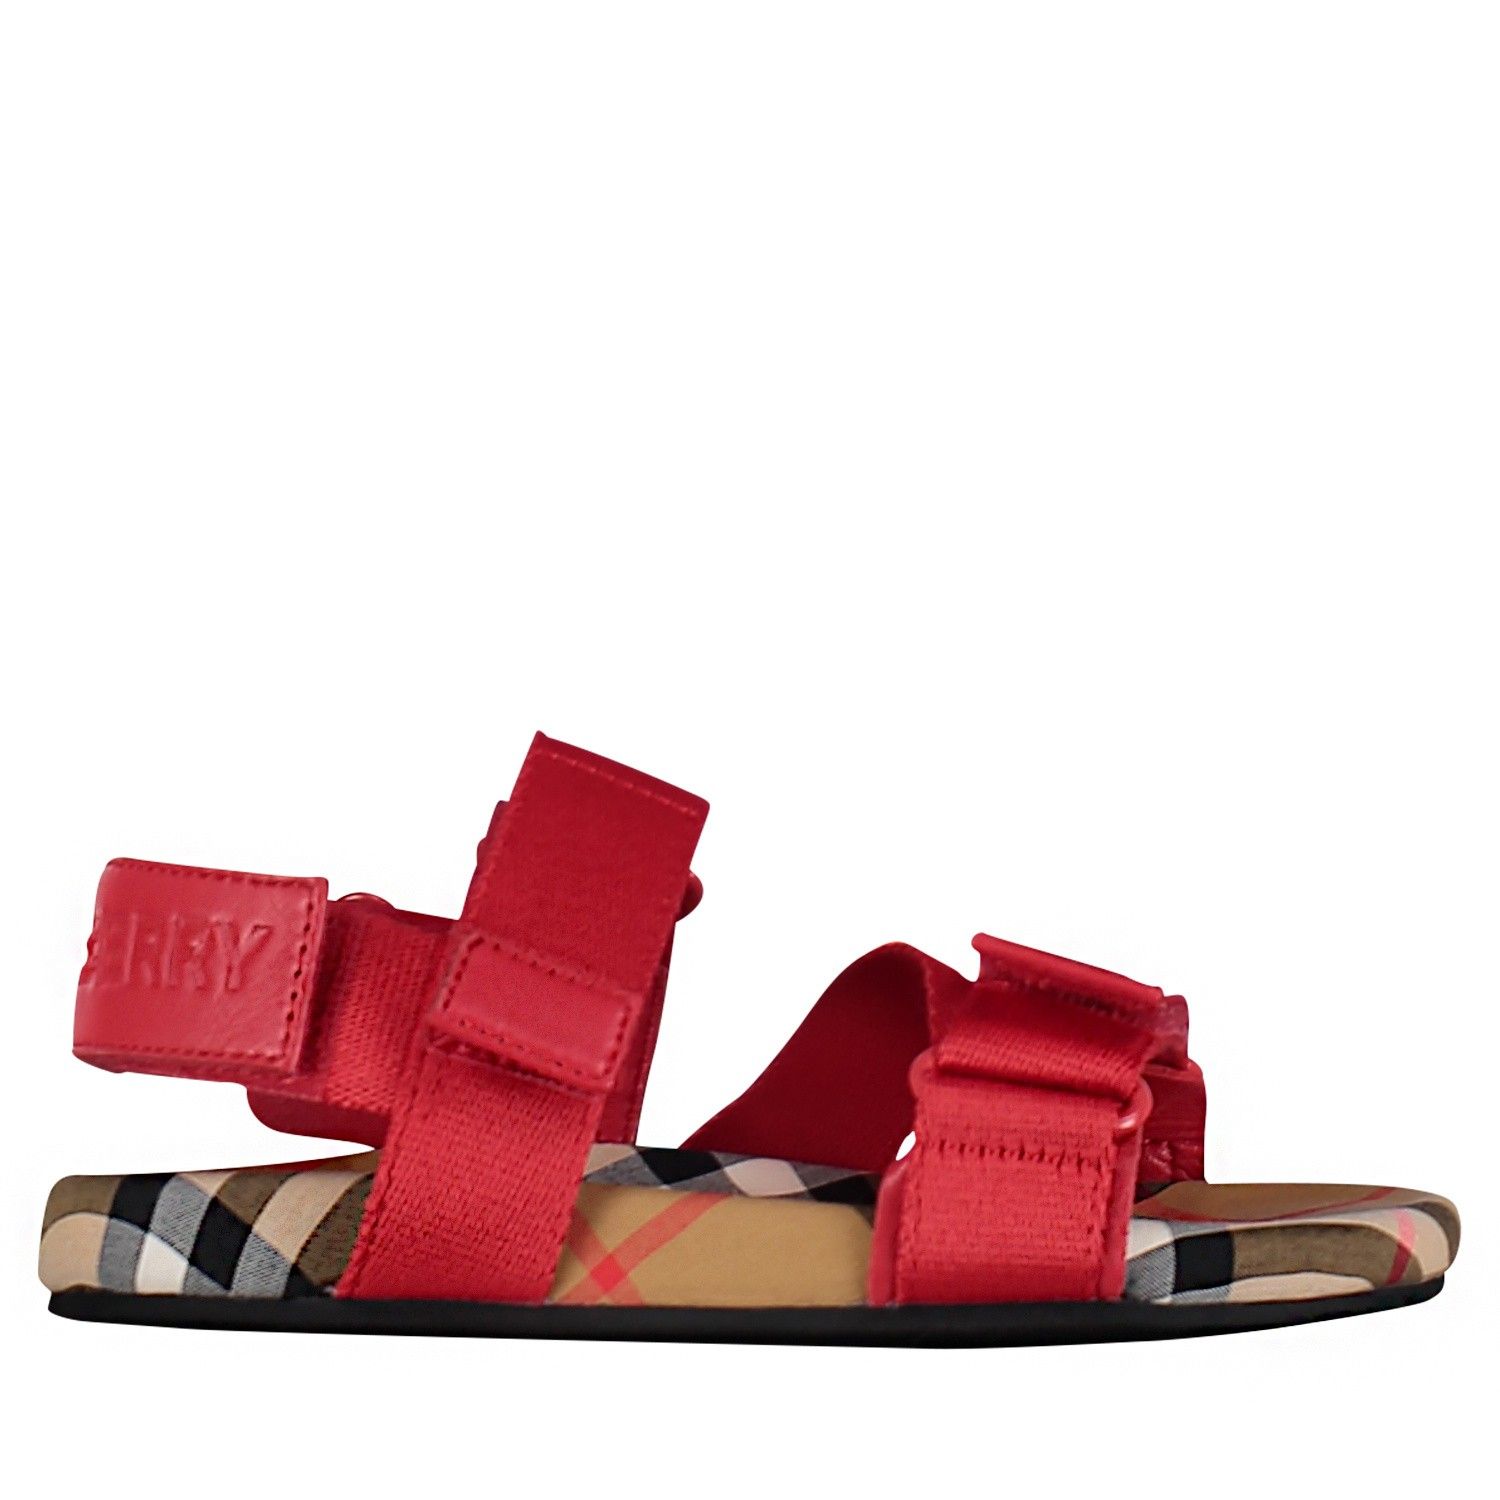 Burberry 8011415 Girls Red at Coccinelle